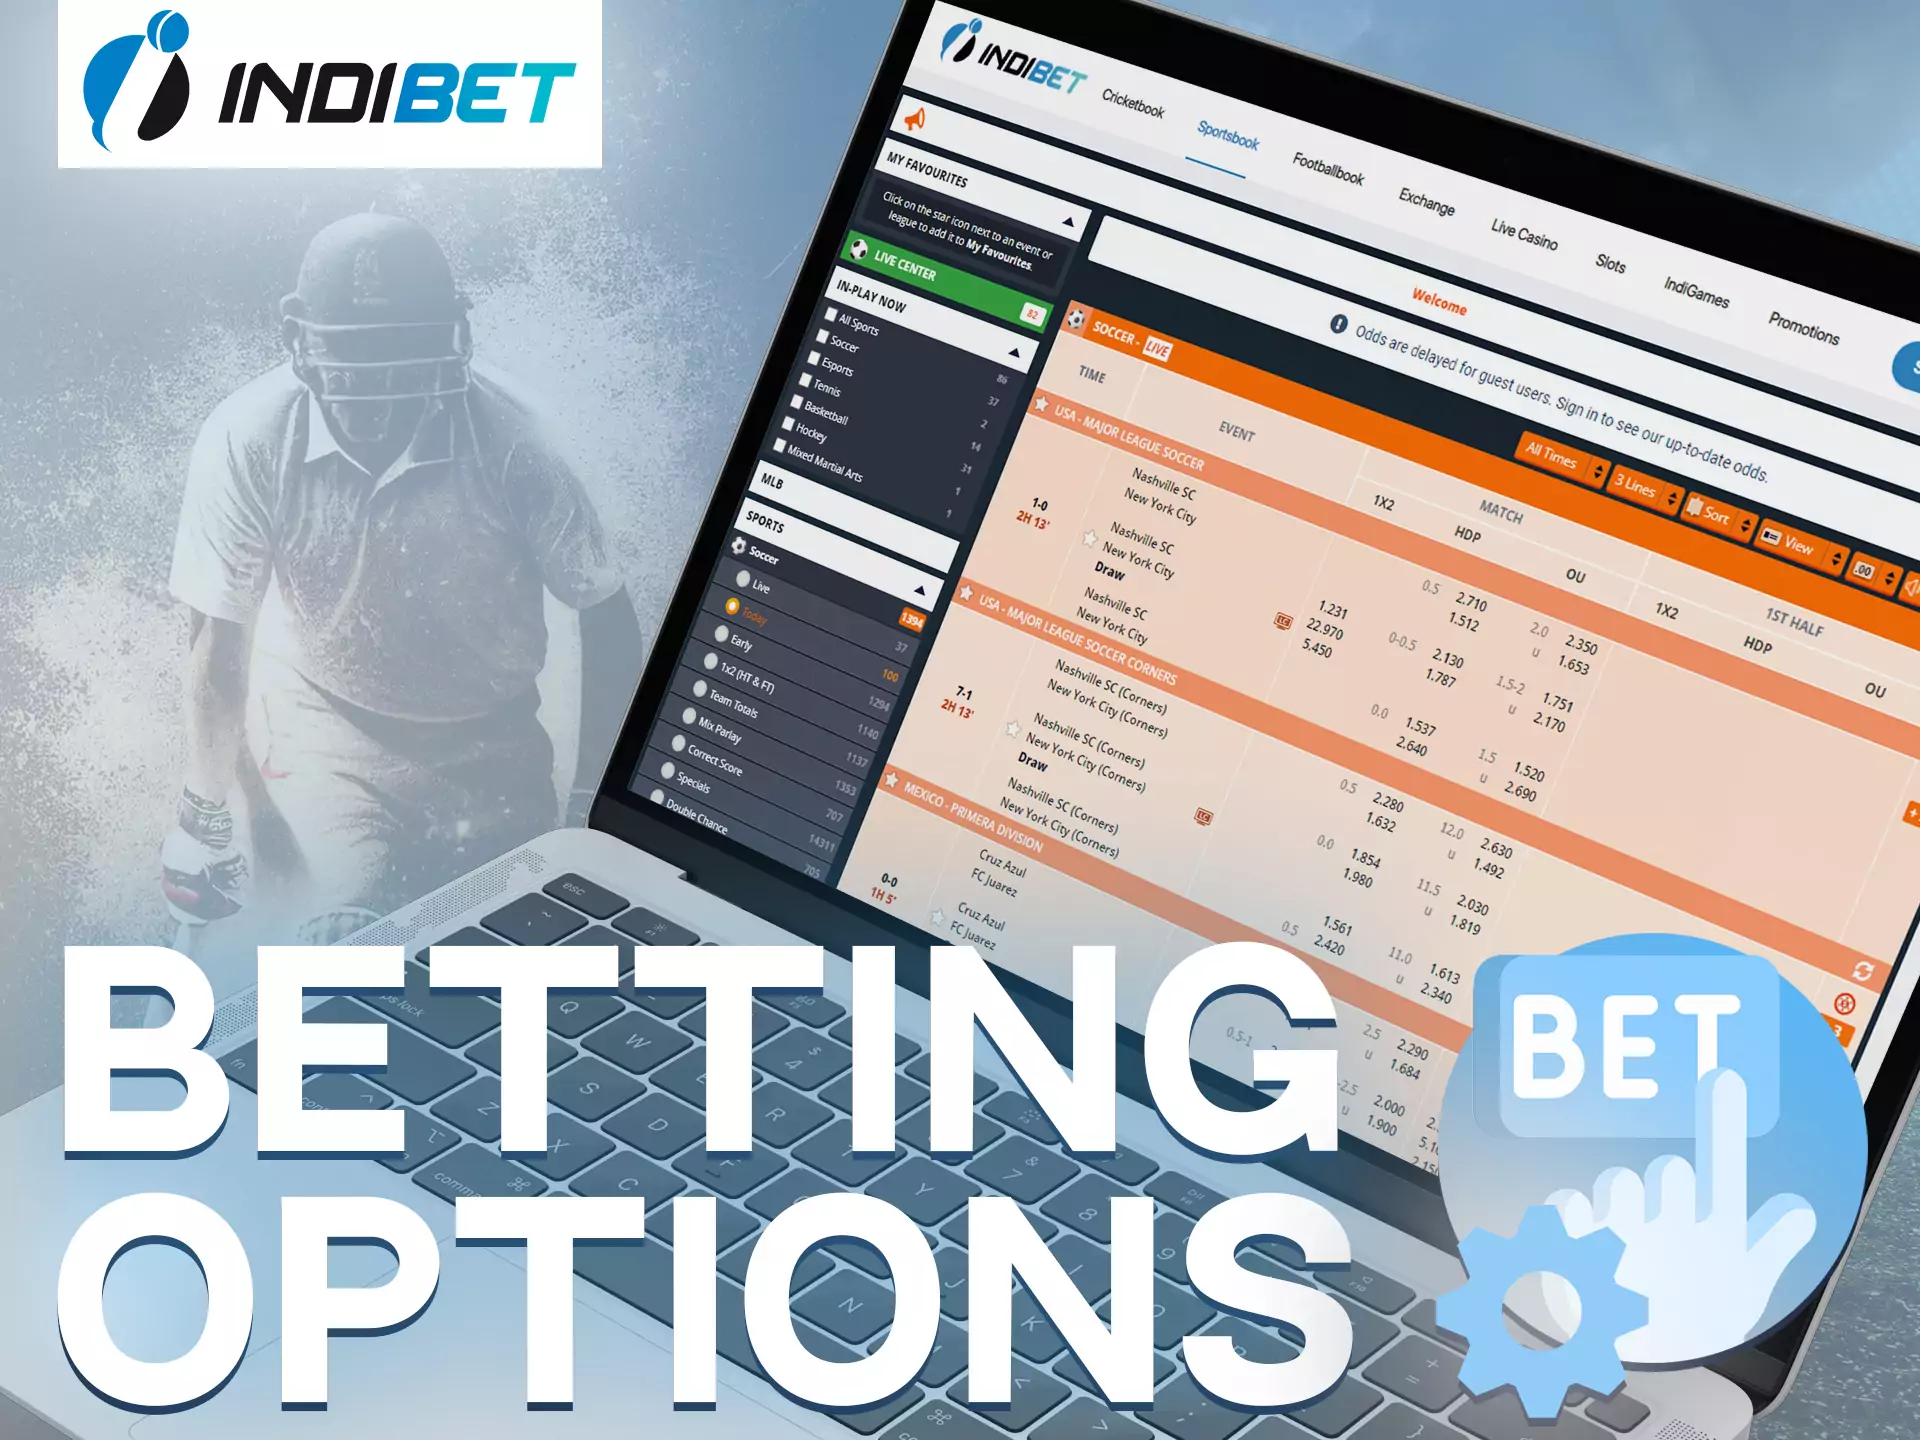 At Indibet, place your bets and choose different options for your bets.